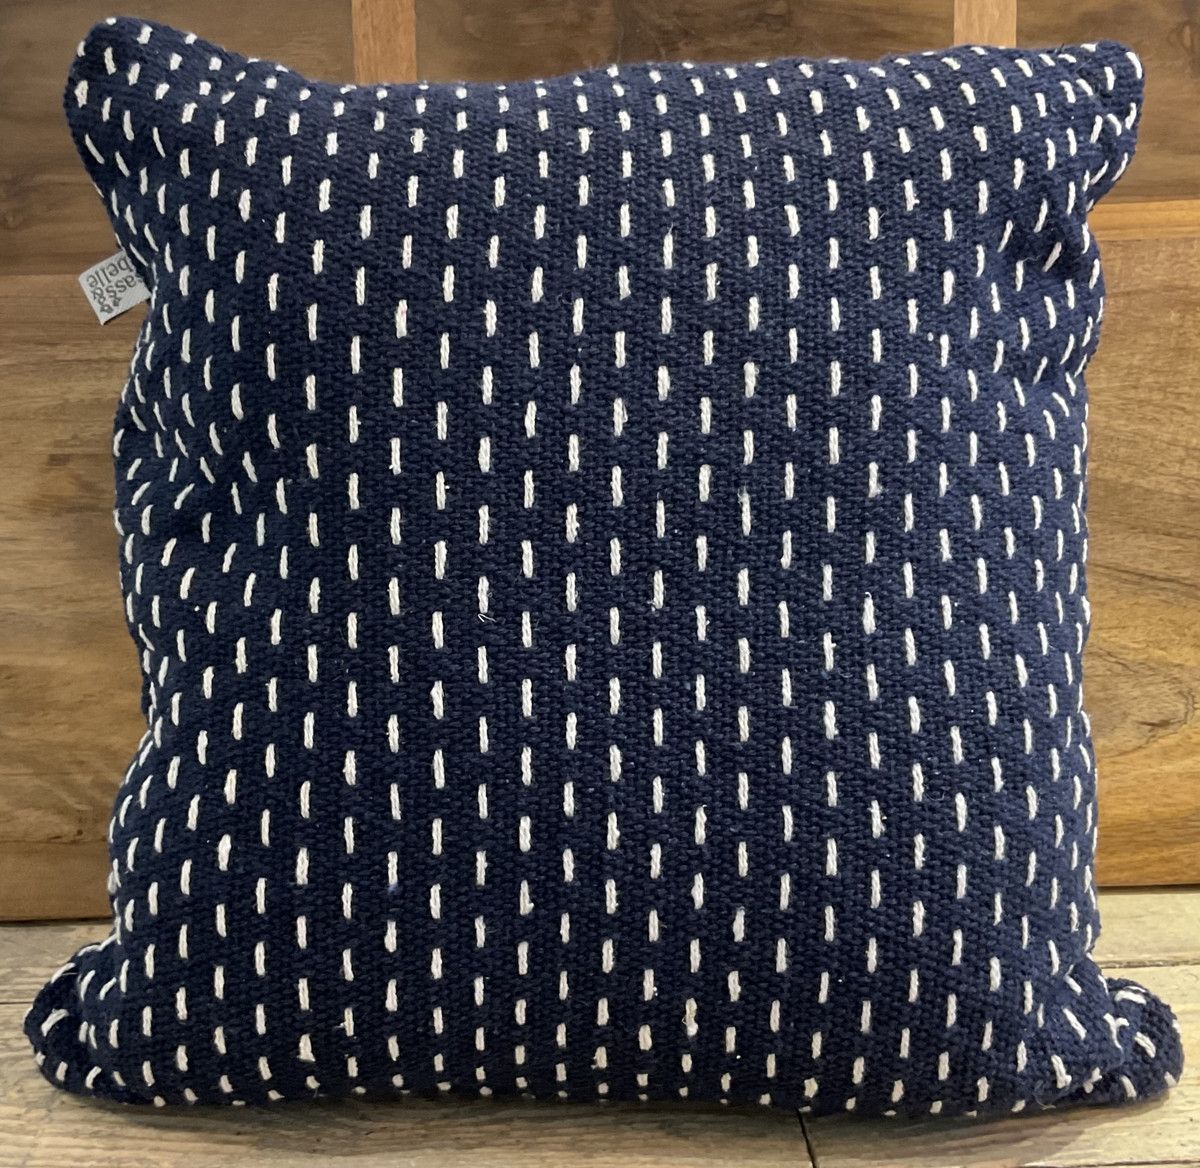 Woven cushion with stitch detail 